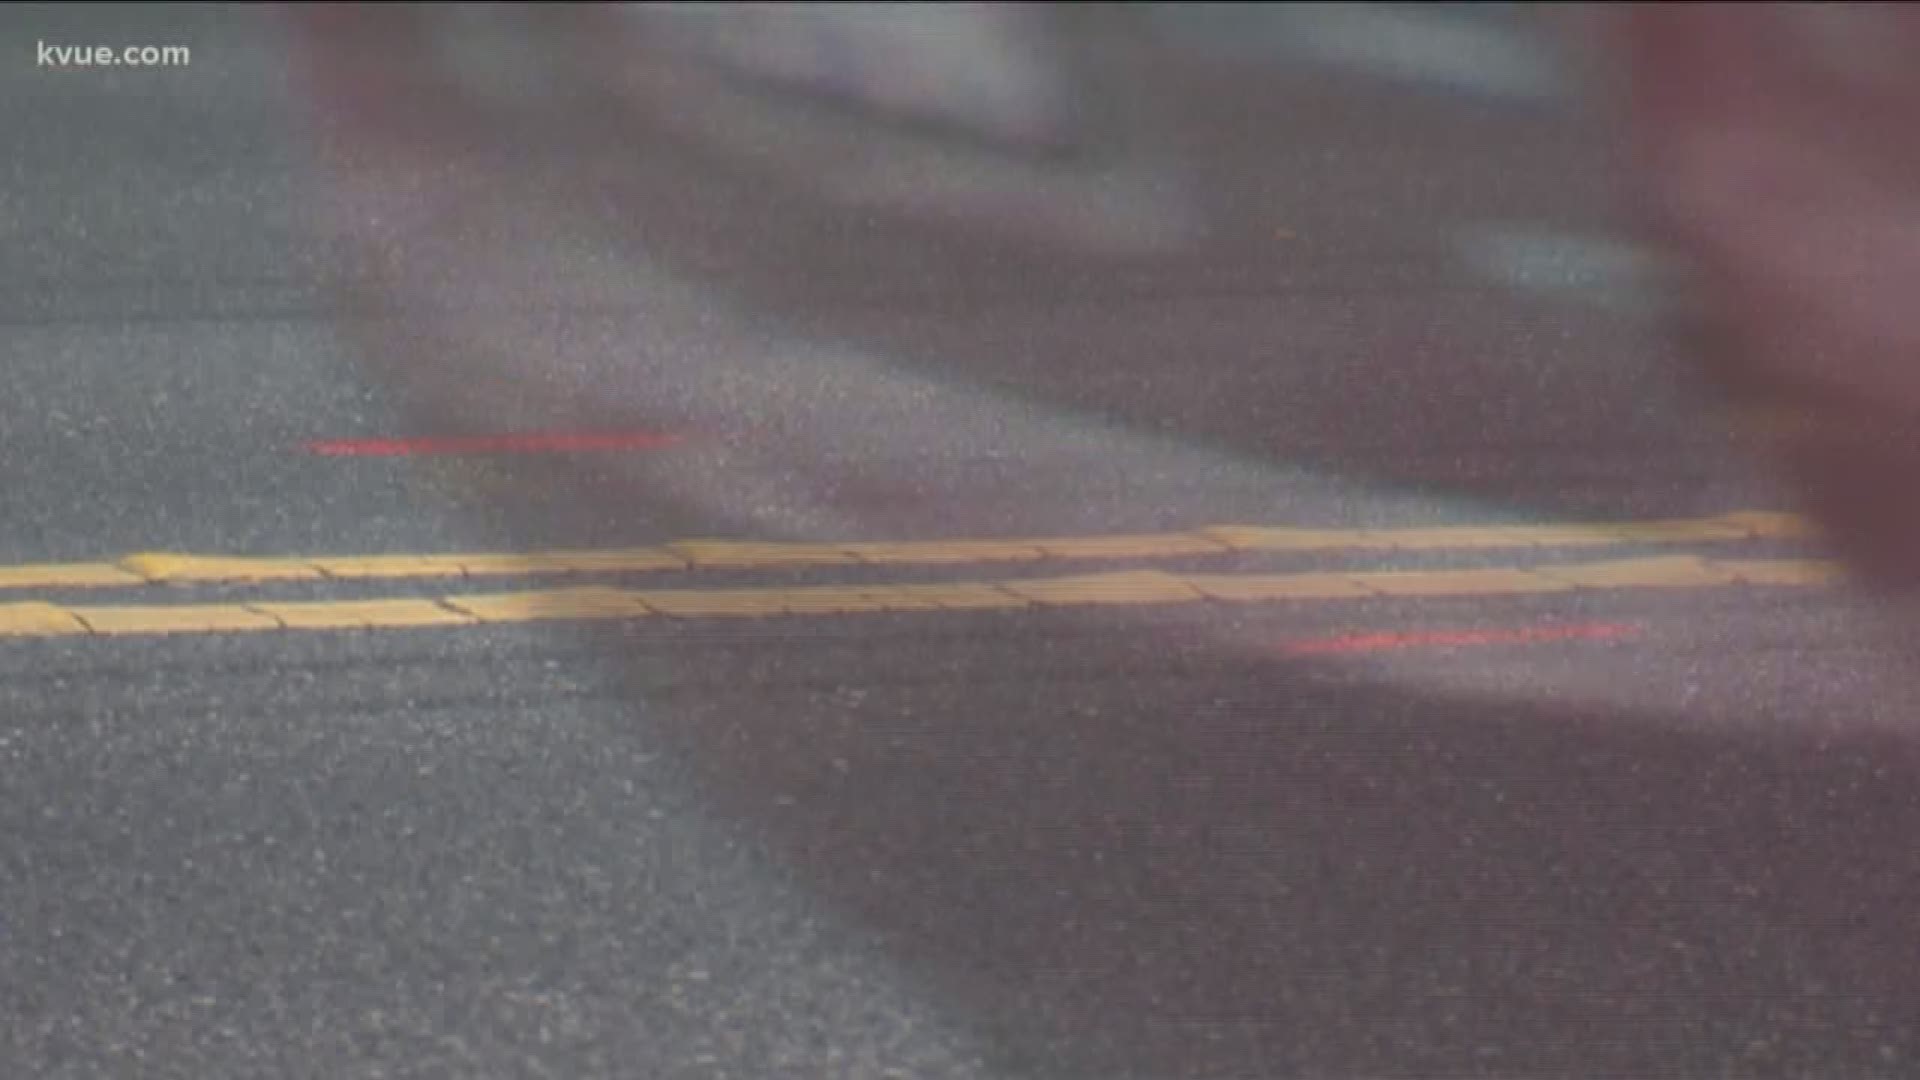 In just the first few months of 2019, there were nearly 20 traffic deaths on Bastrop County roads. Law enforcement in the area is cracking down on speeders and anyone driving recklessly.